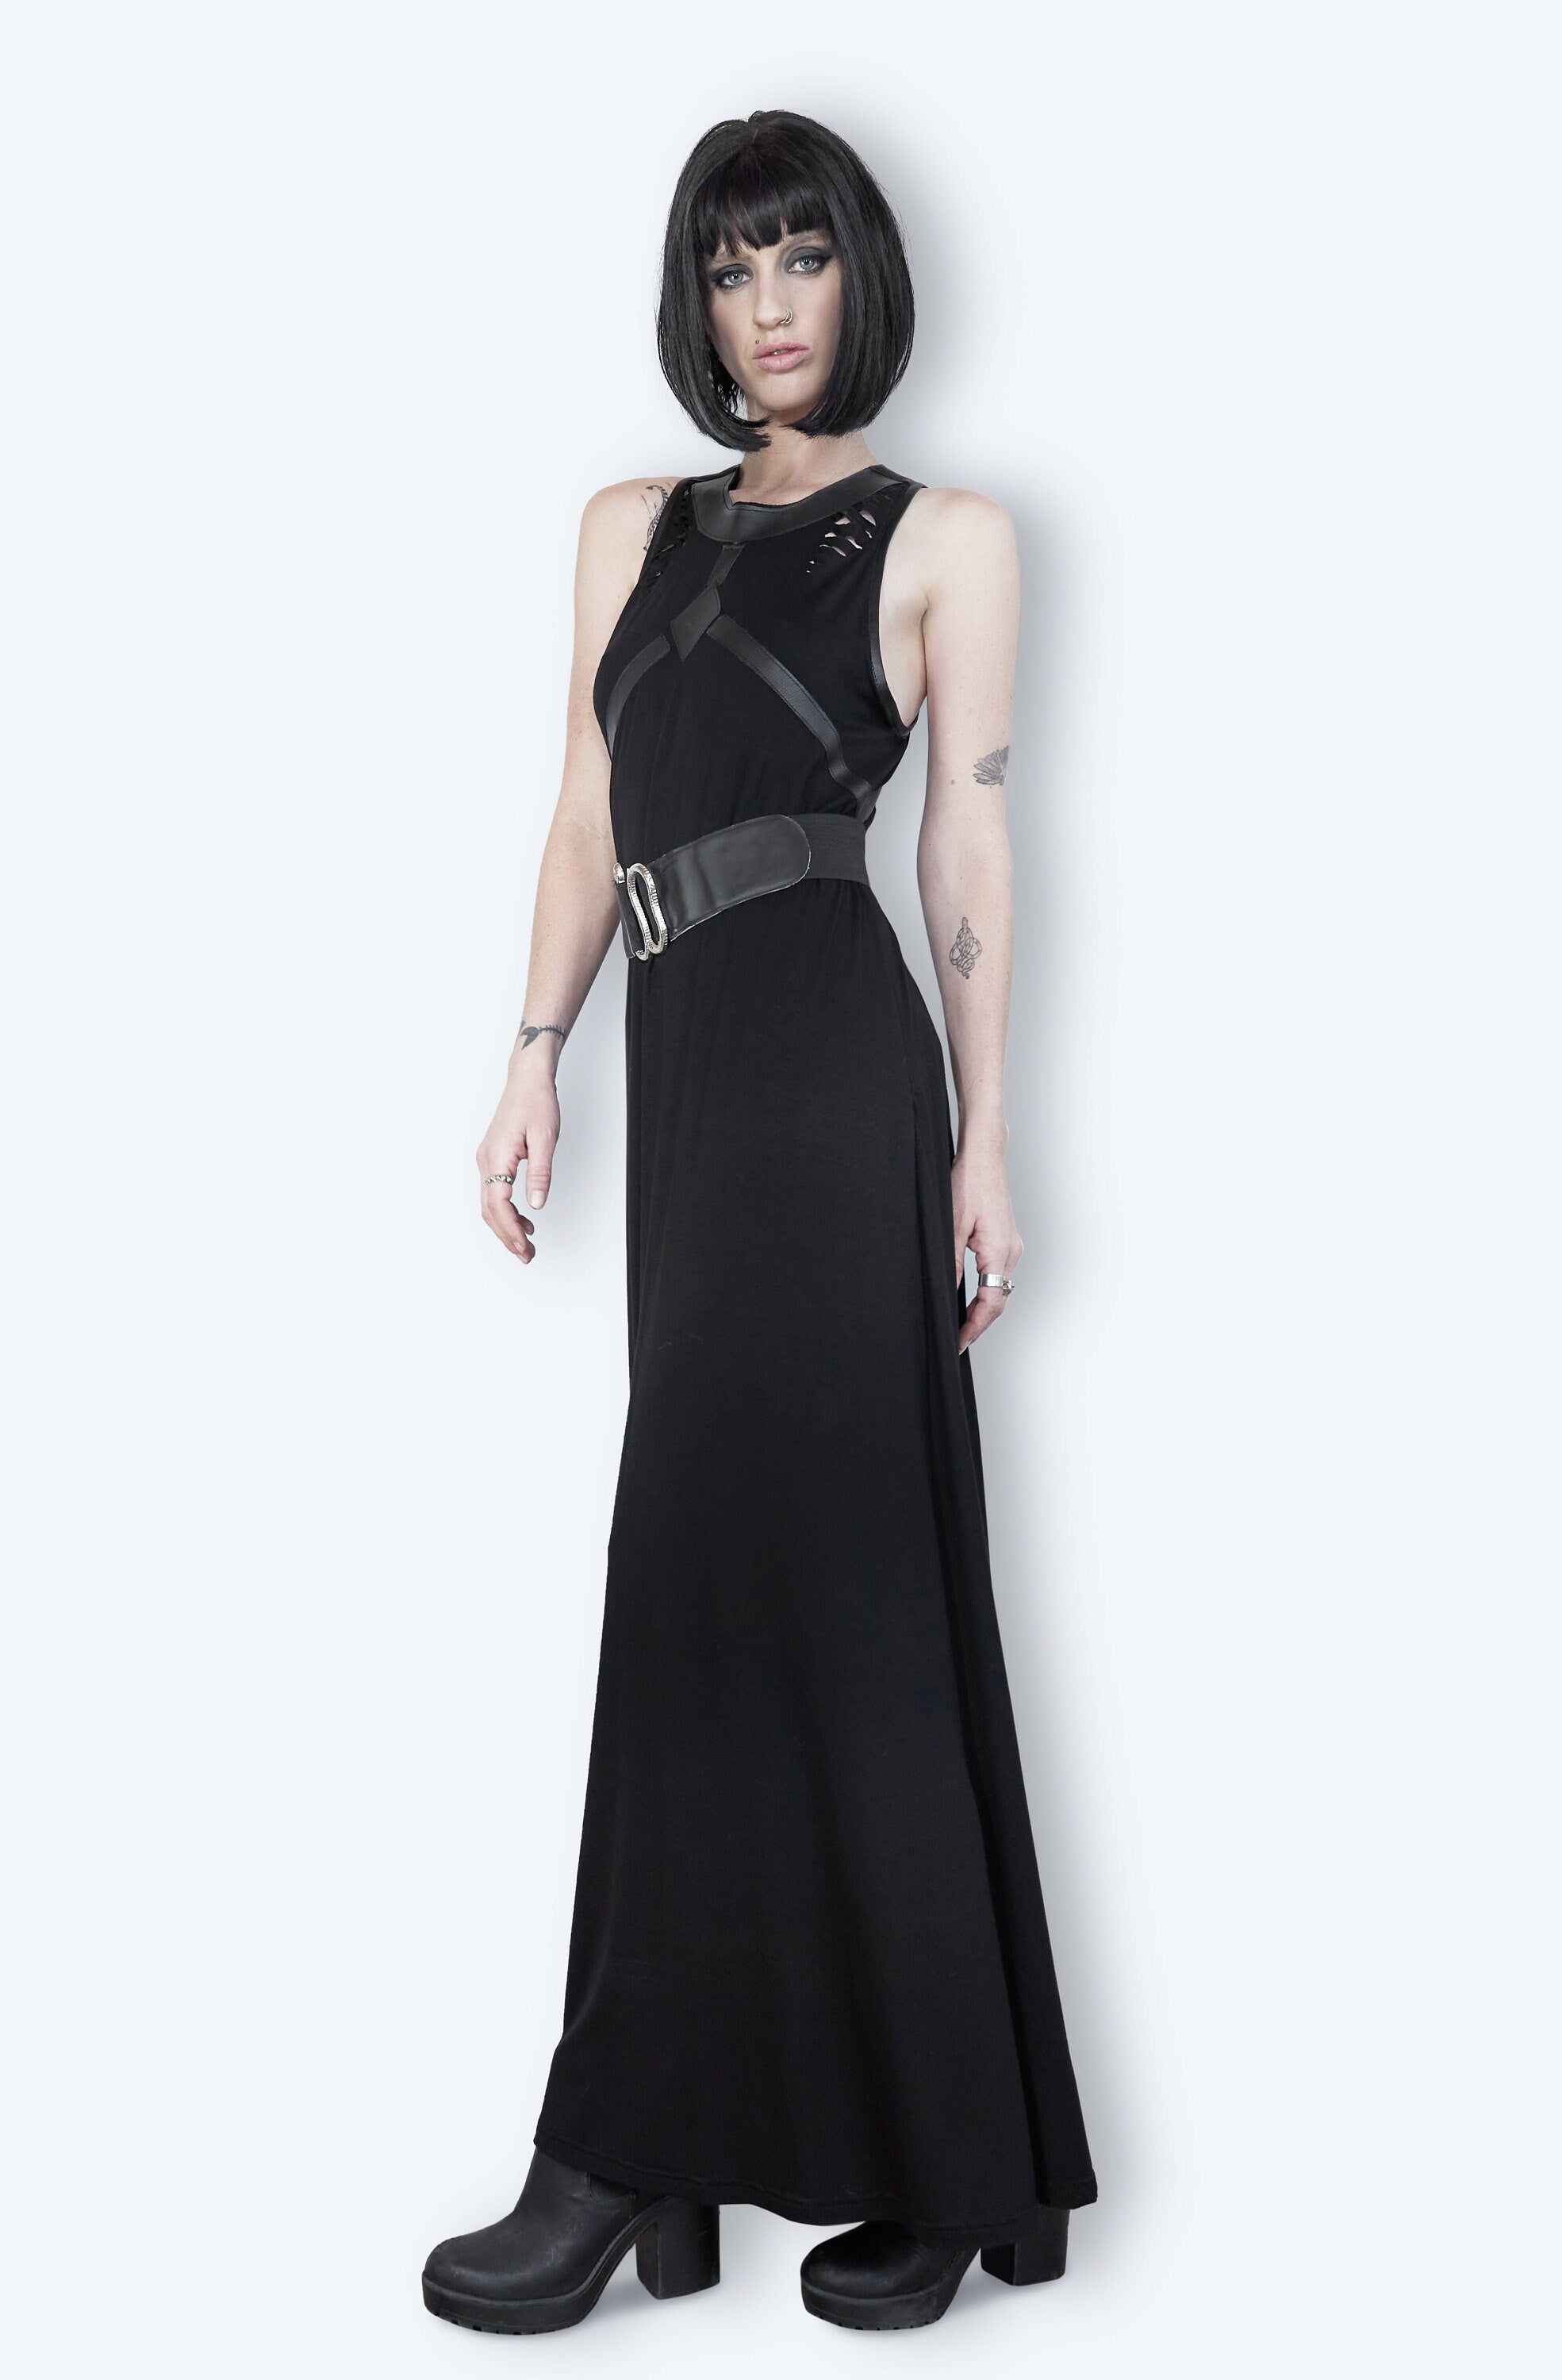 Black Faux Leather Off The Shoulder Shirred Evening Gown – Deanzign